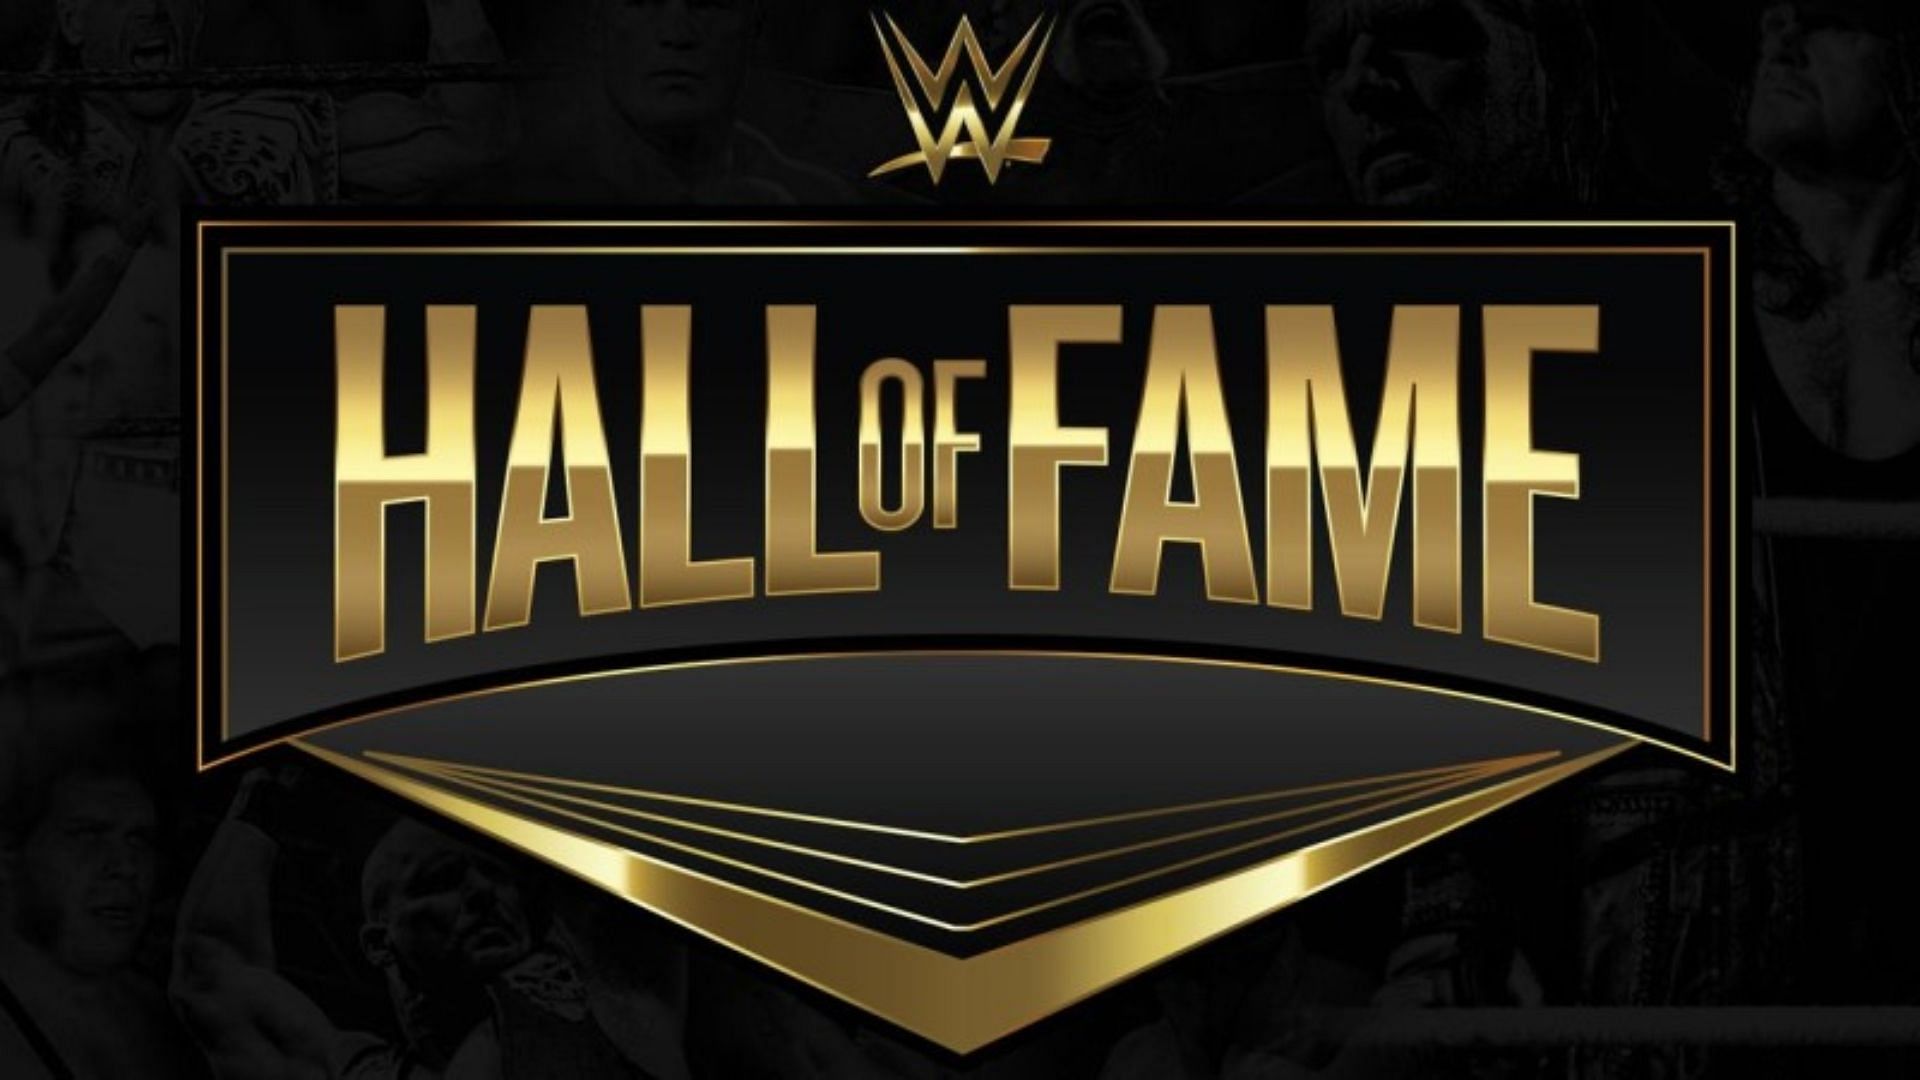 The 2023 WWE Hall of Fame is set to take place in March 31st.